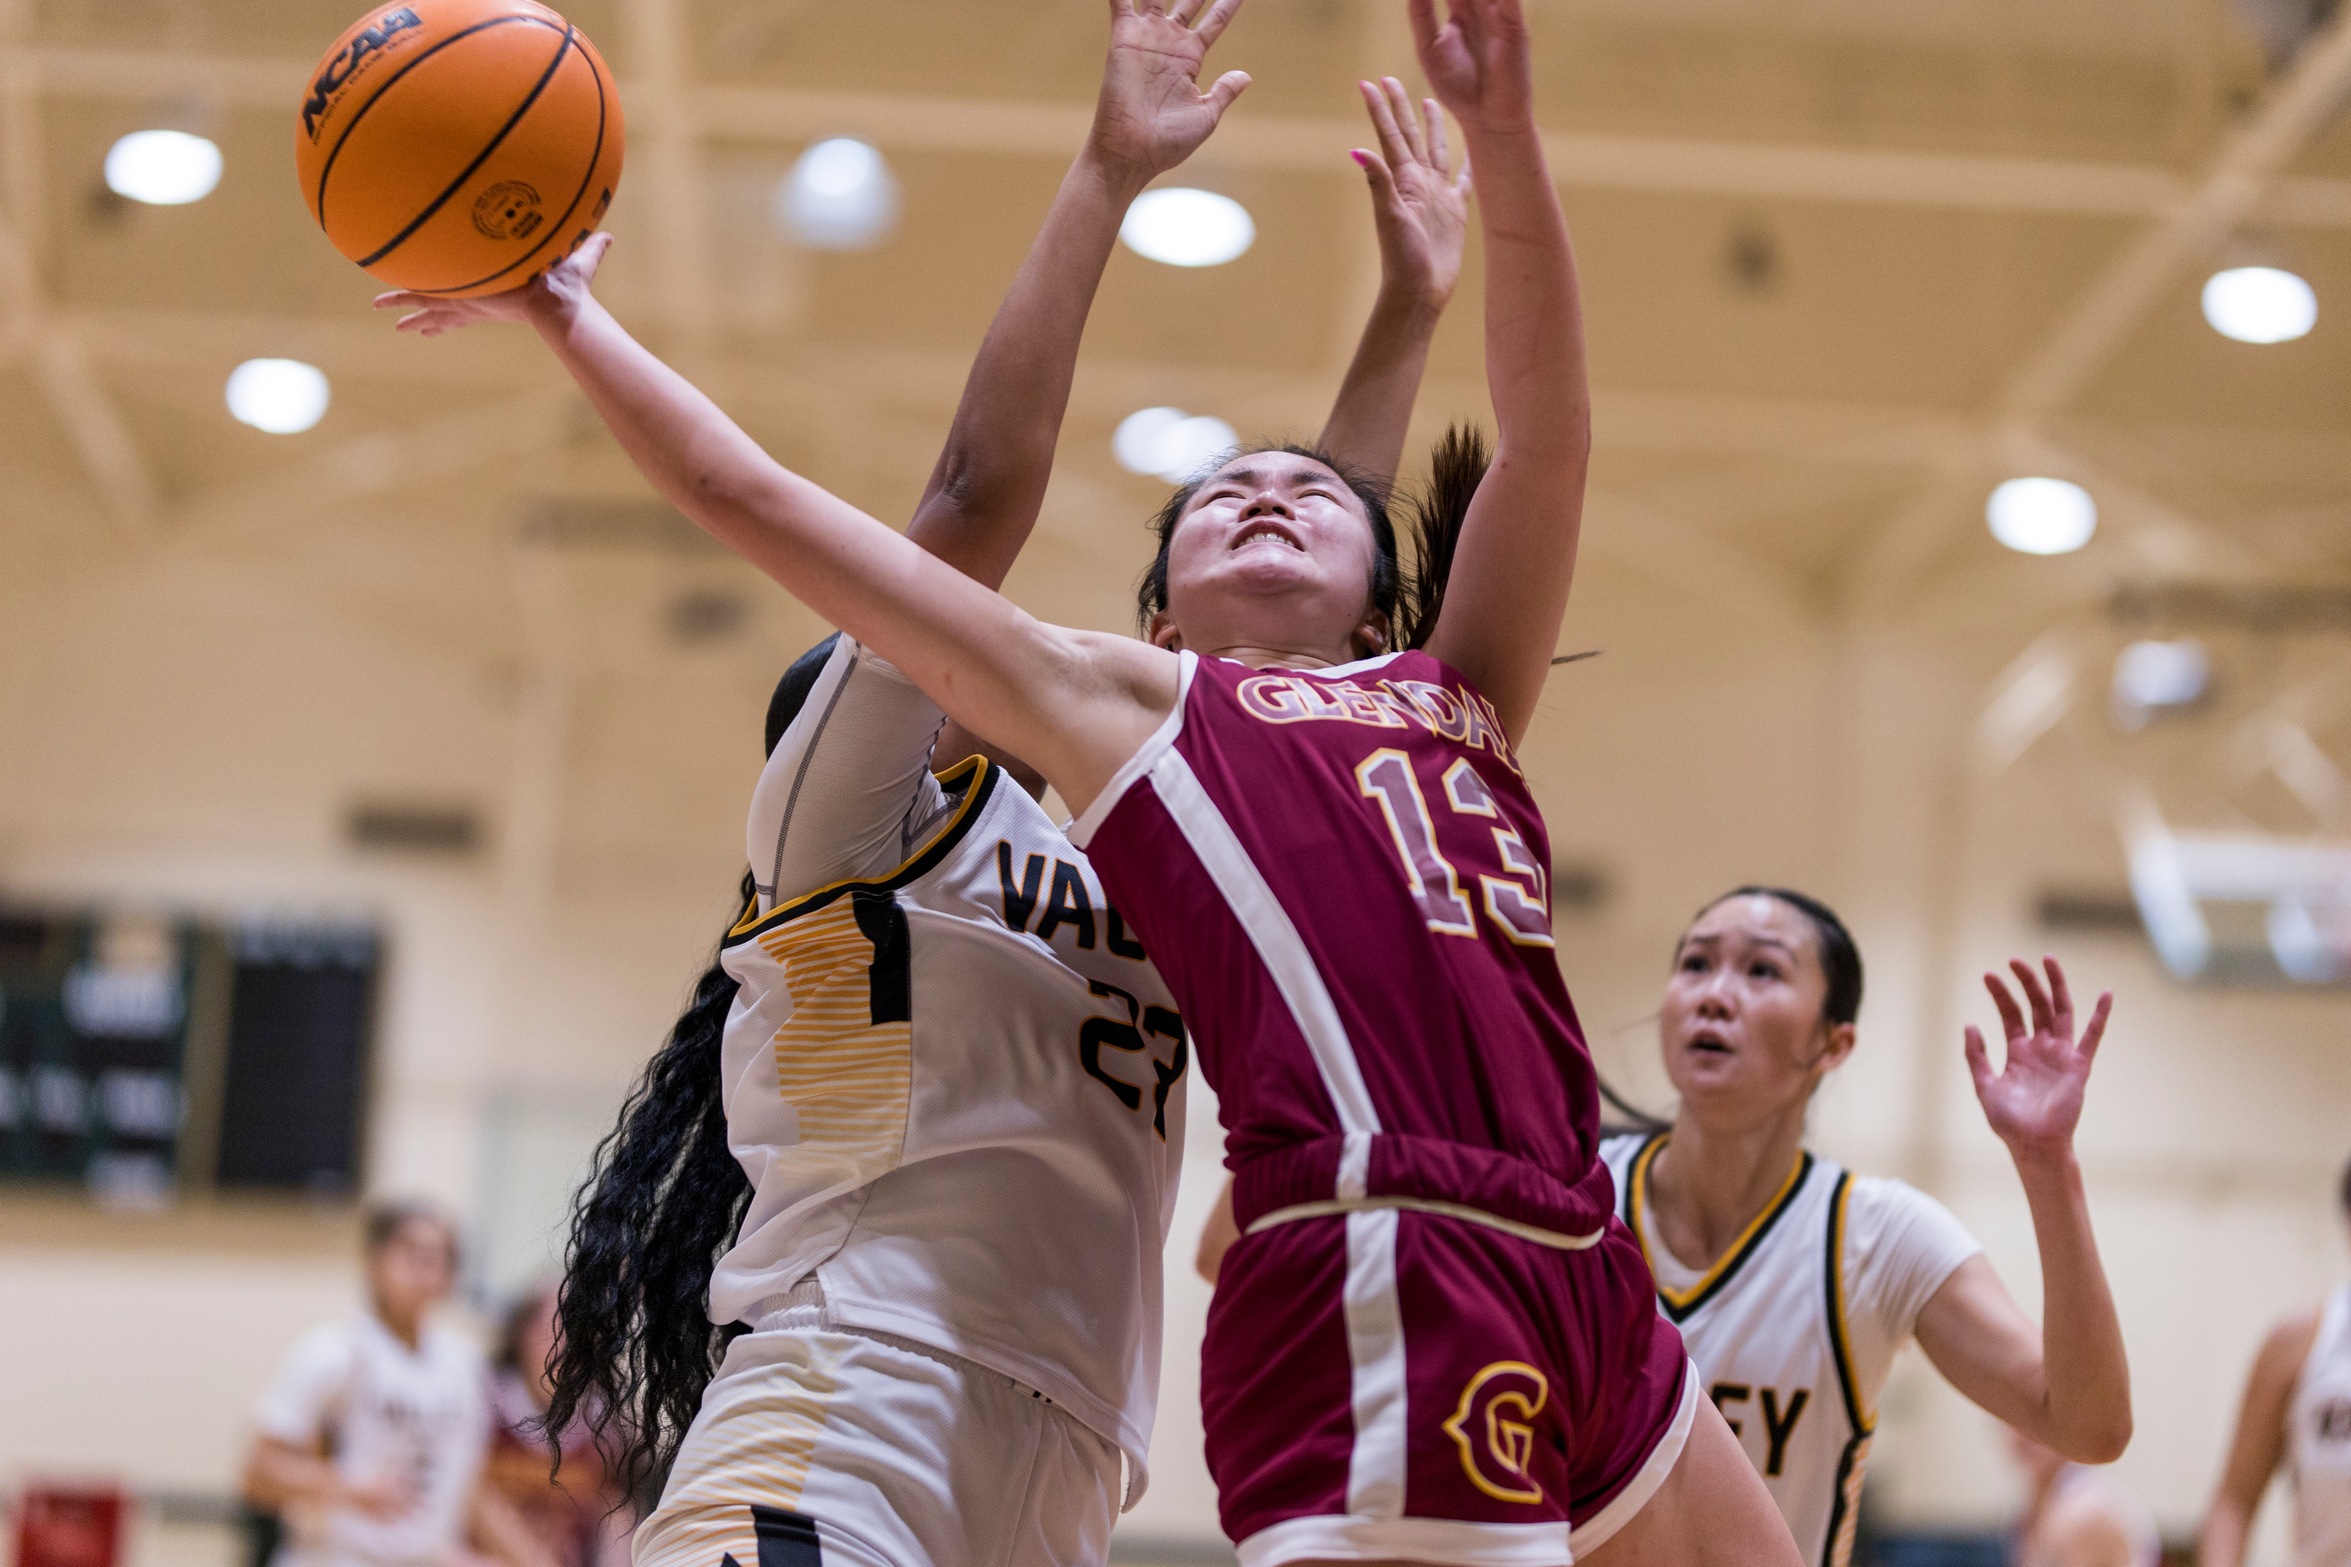 GCC Women's Basketball beat L.A. Valley College 56-52 Jan. 11; is in first place in WSC South at 3-0 and is 13-4 overall